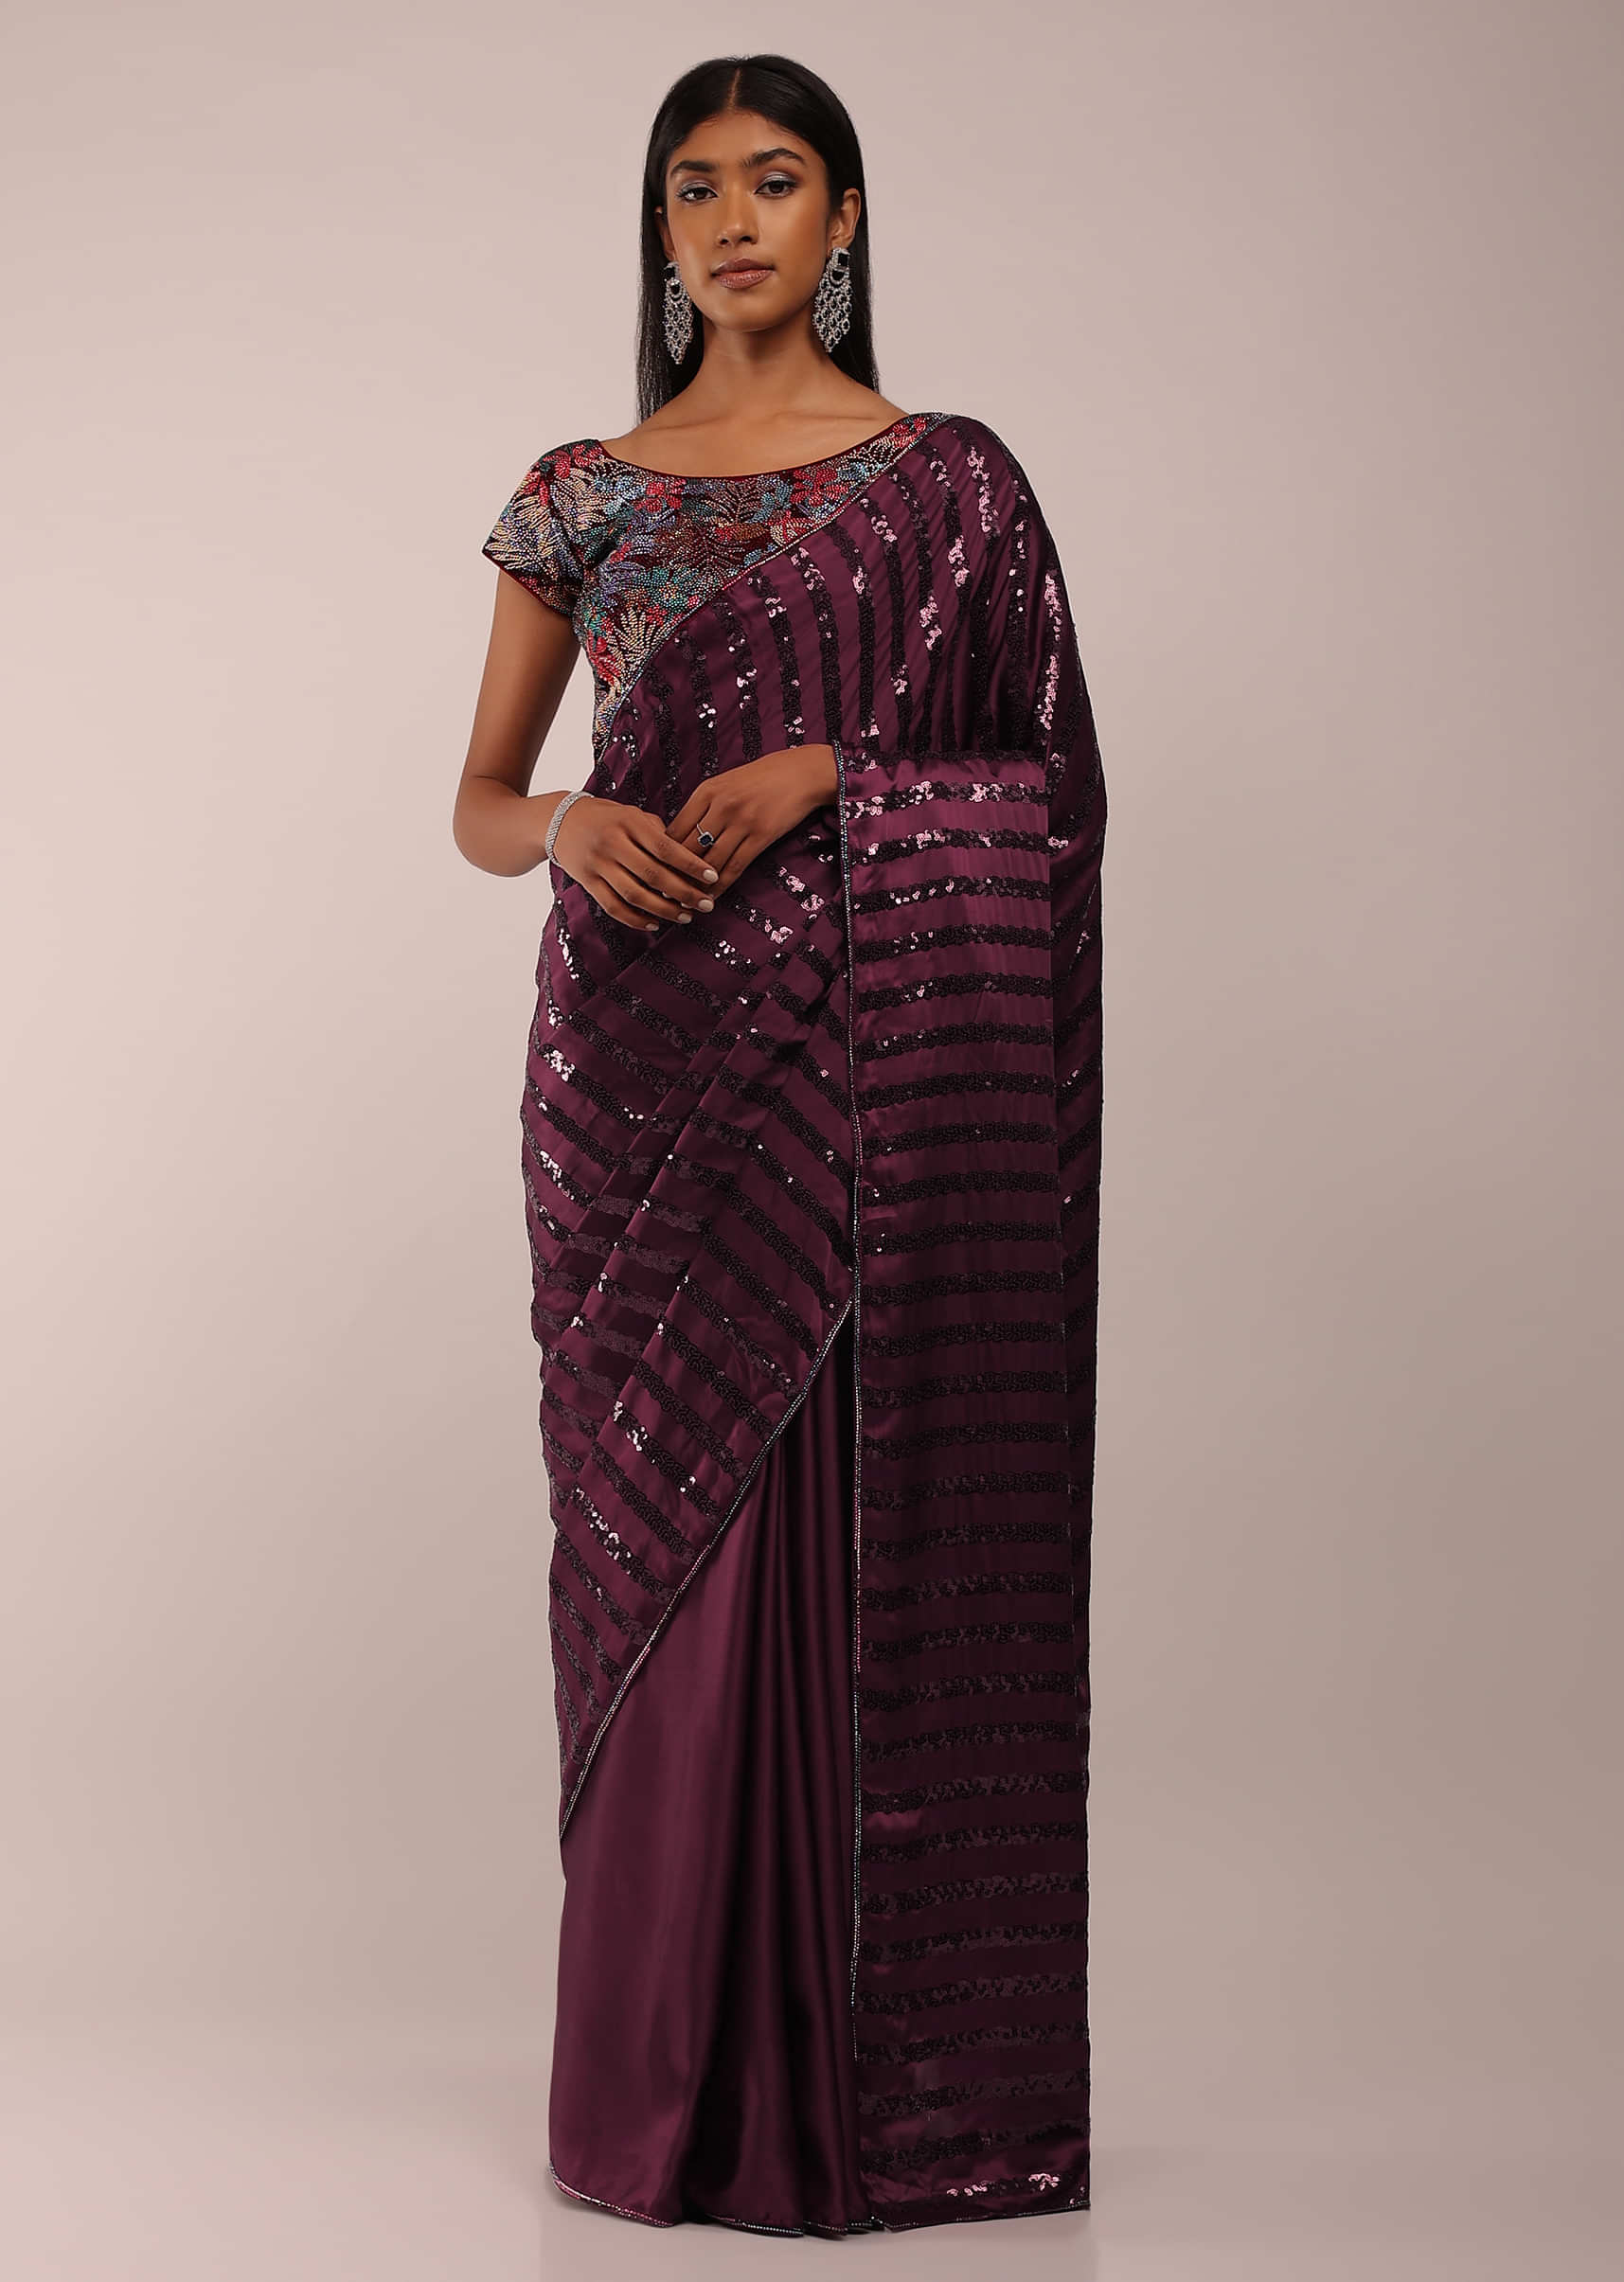 Grape Wine Satin Saree In Thick Strips Sequins Embroidery With Two Tones Beads Embellishment On The Pallu Border